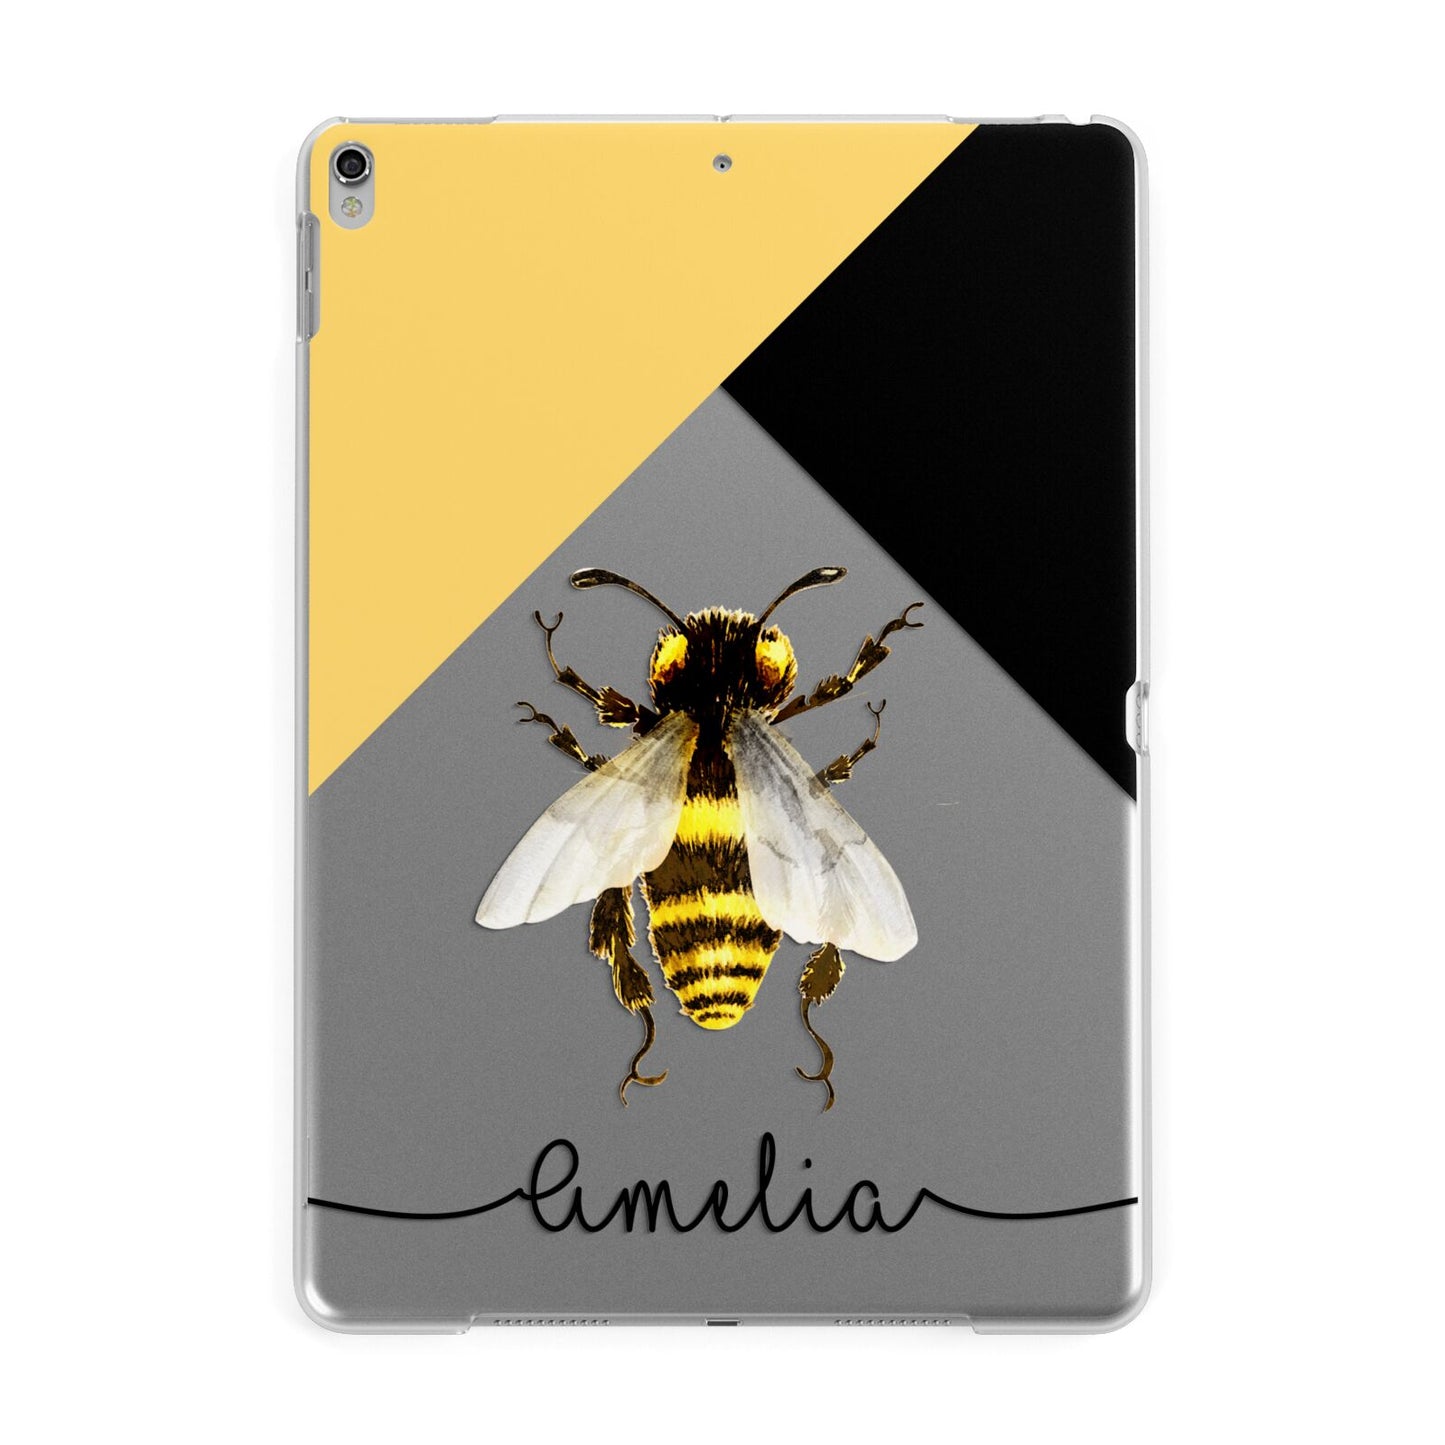 Bee Asymmetrical Background and Name Apple iPad Silver Case